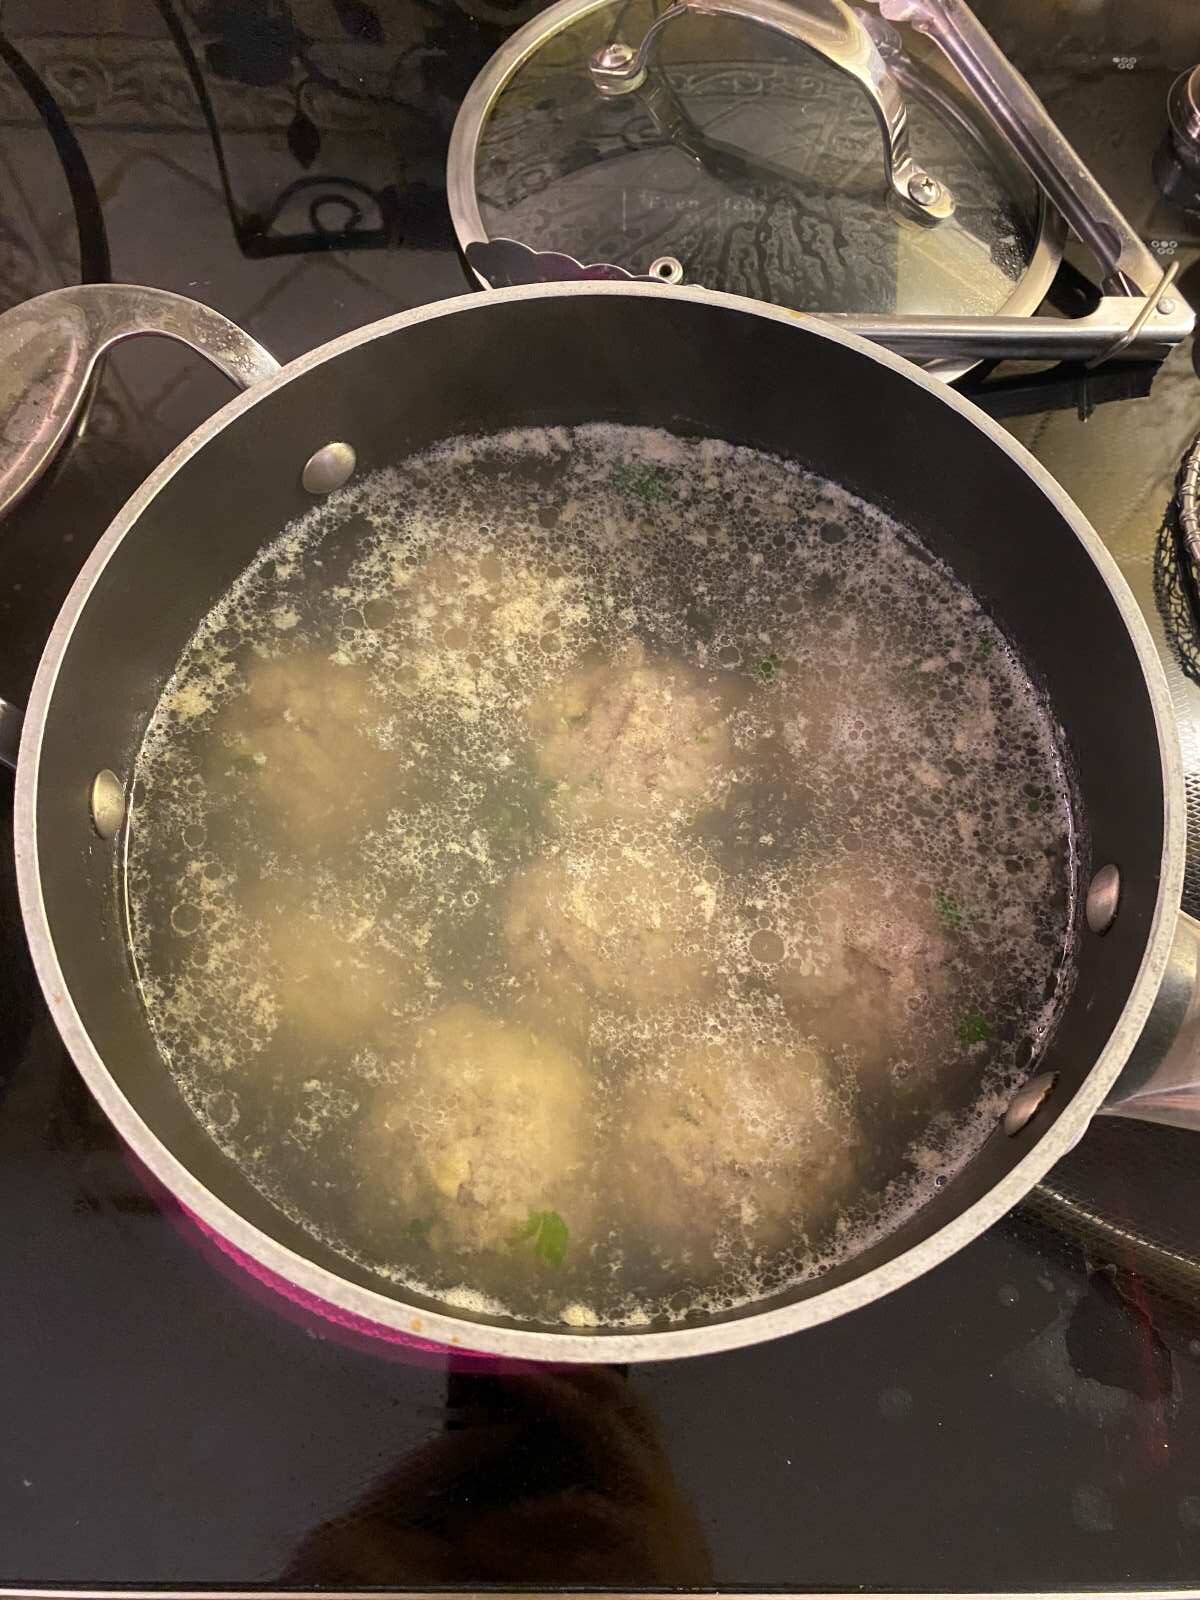 raw meatballs in a pot filled with boiling water.